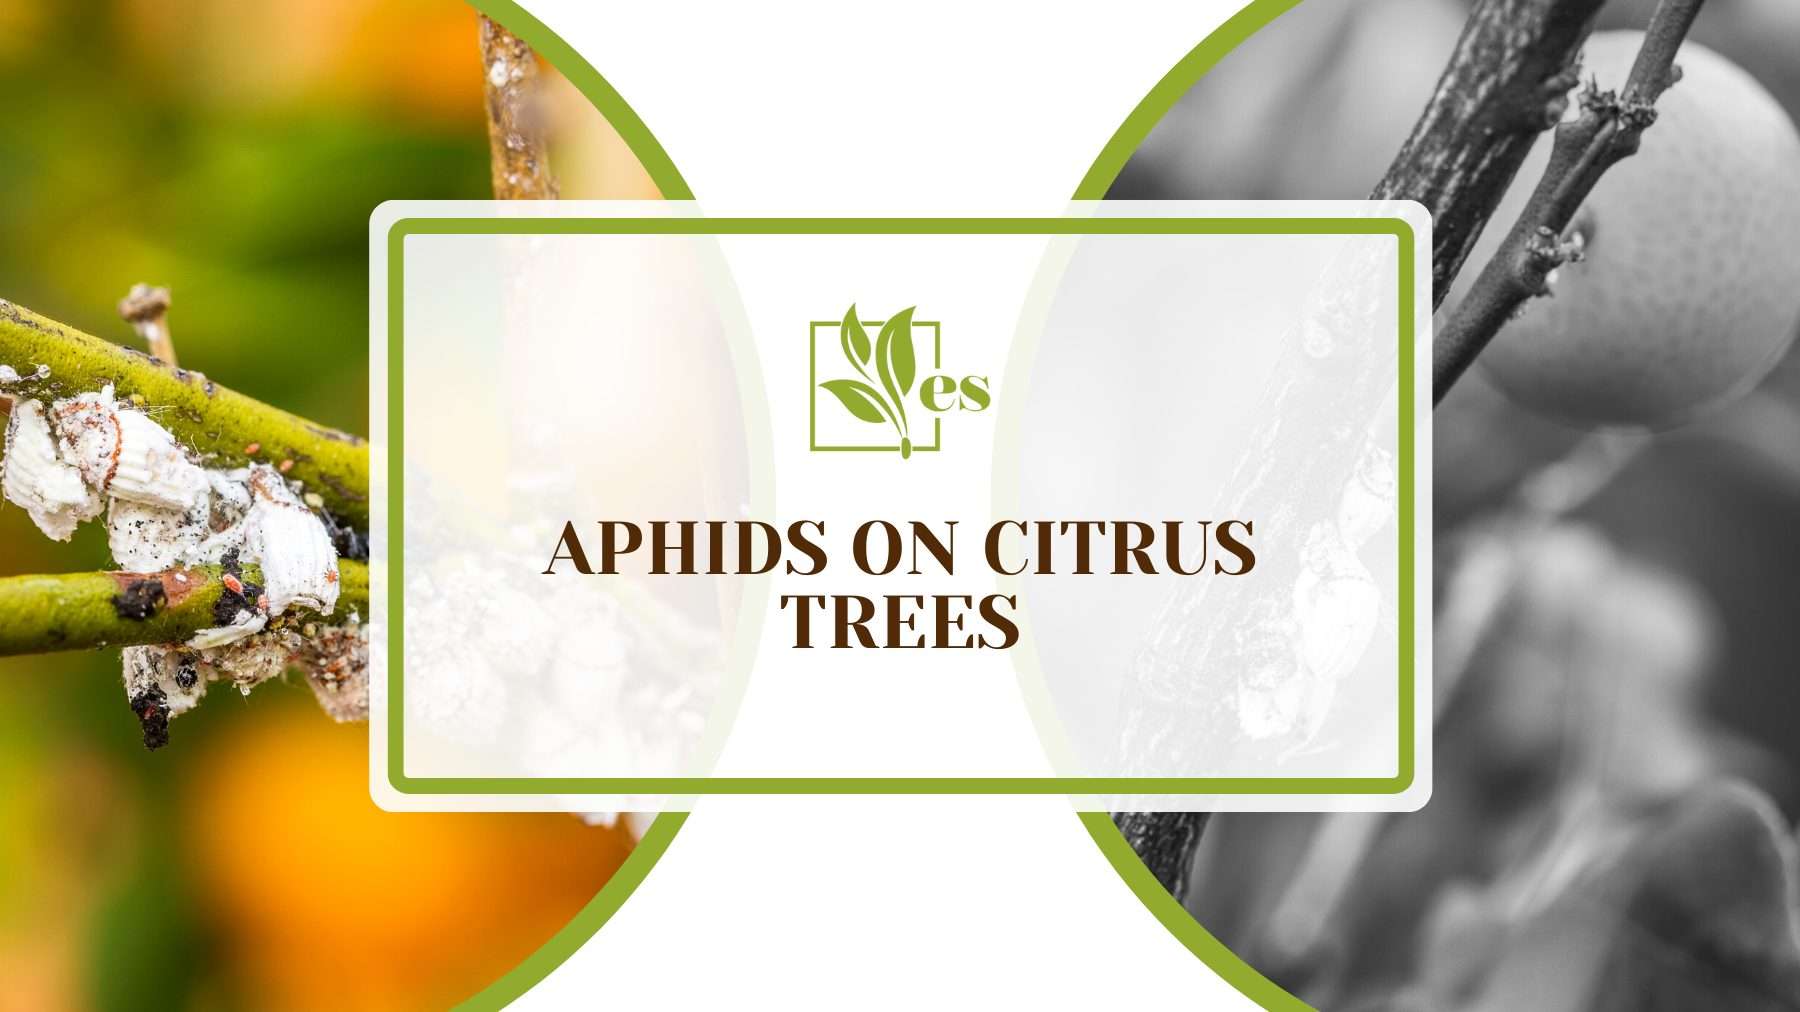 Aphids on Citrus Trees